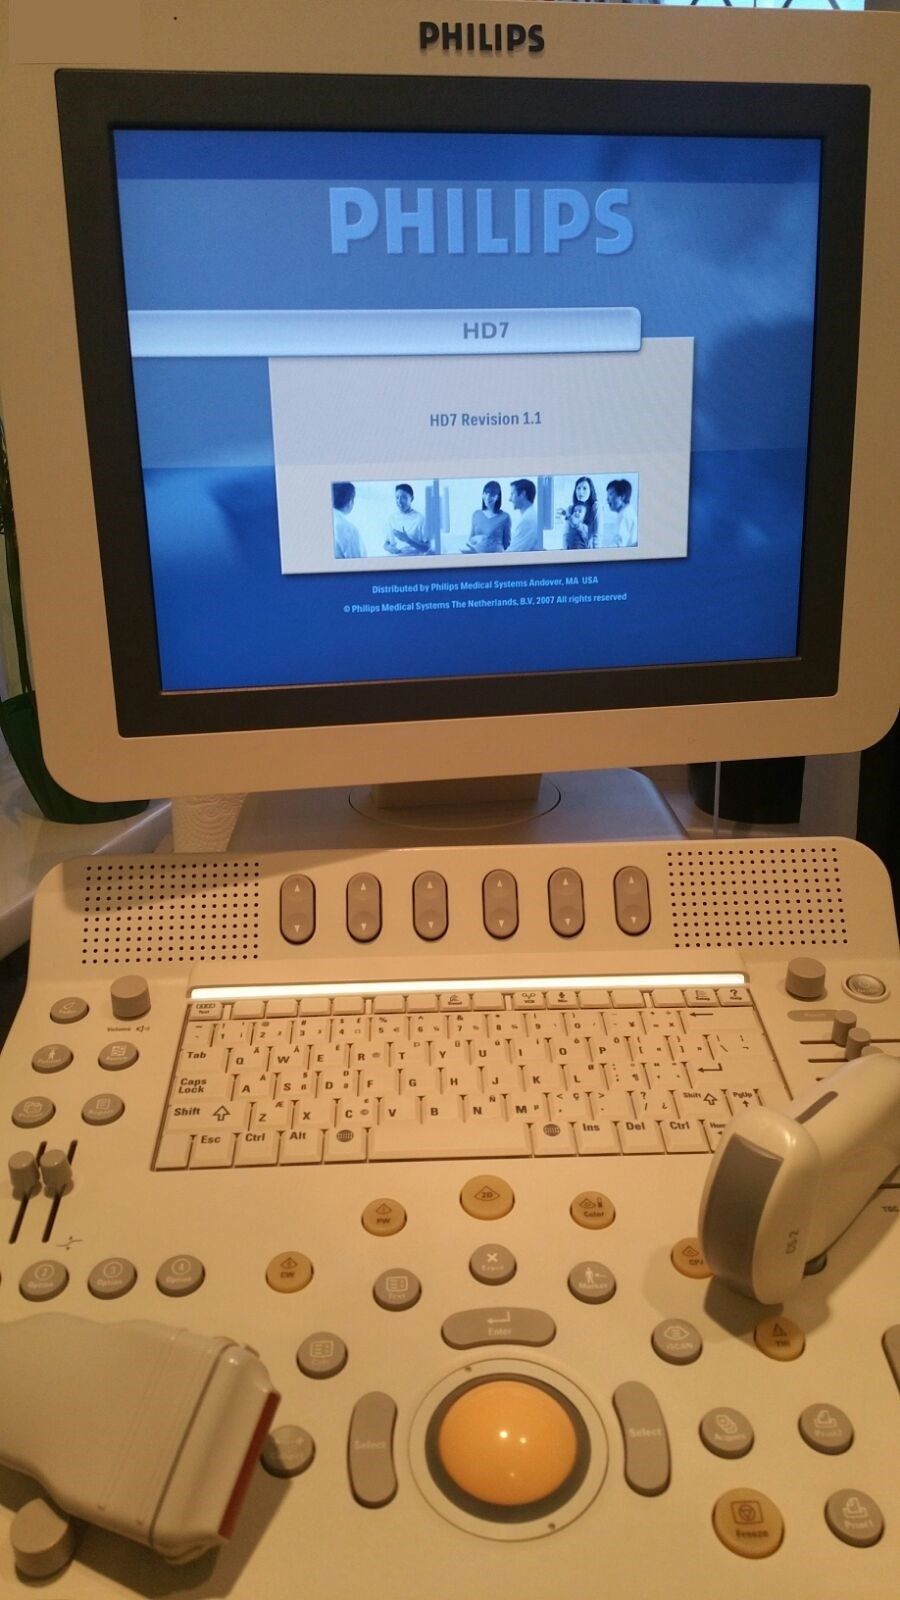 Philips HD7 Revision 1.1 Diagnostic Ultrasound System